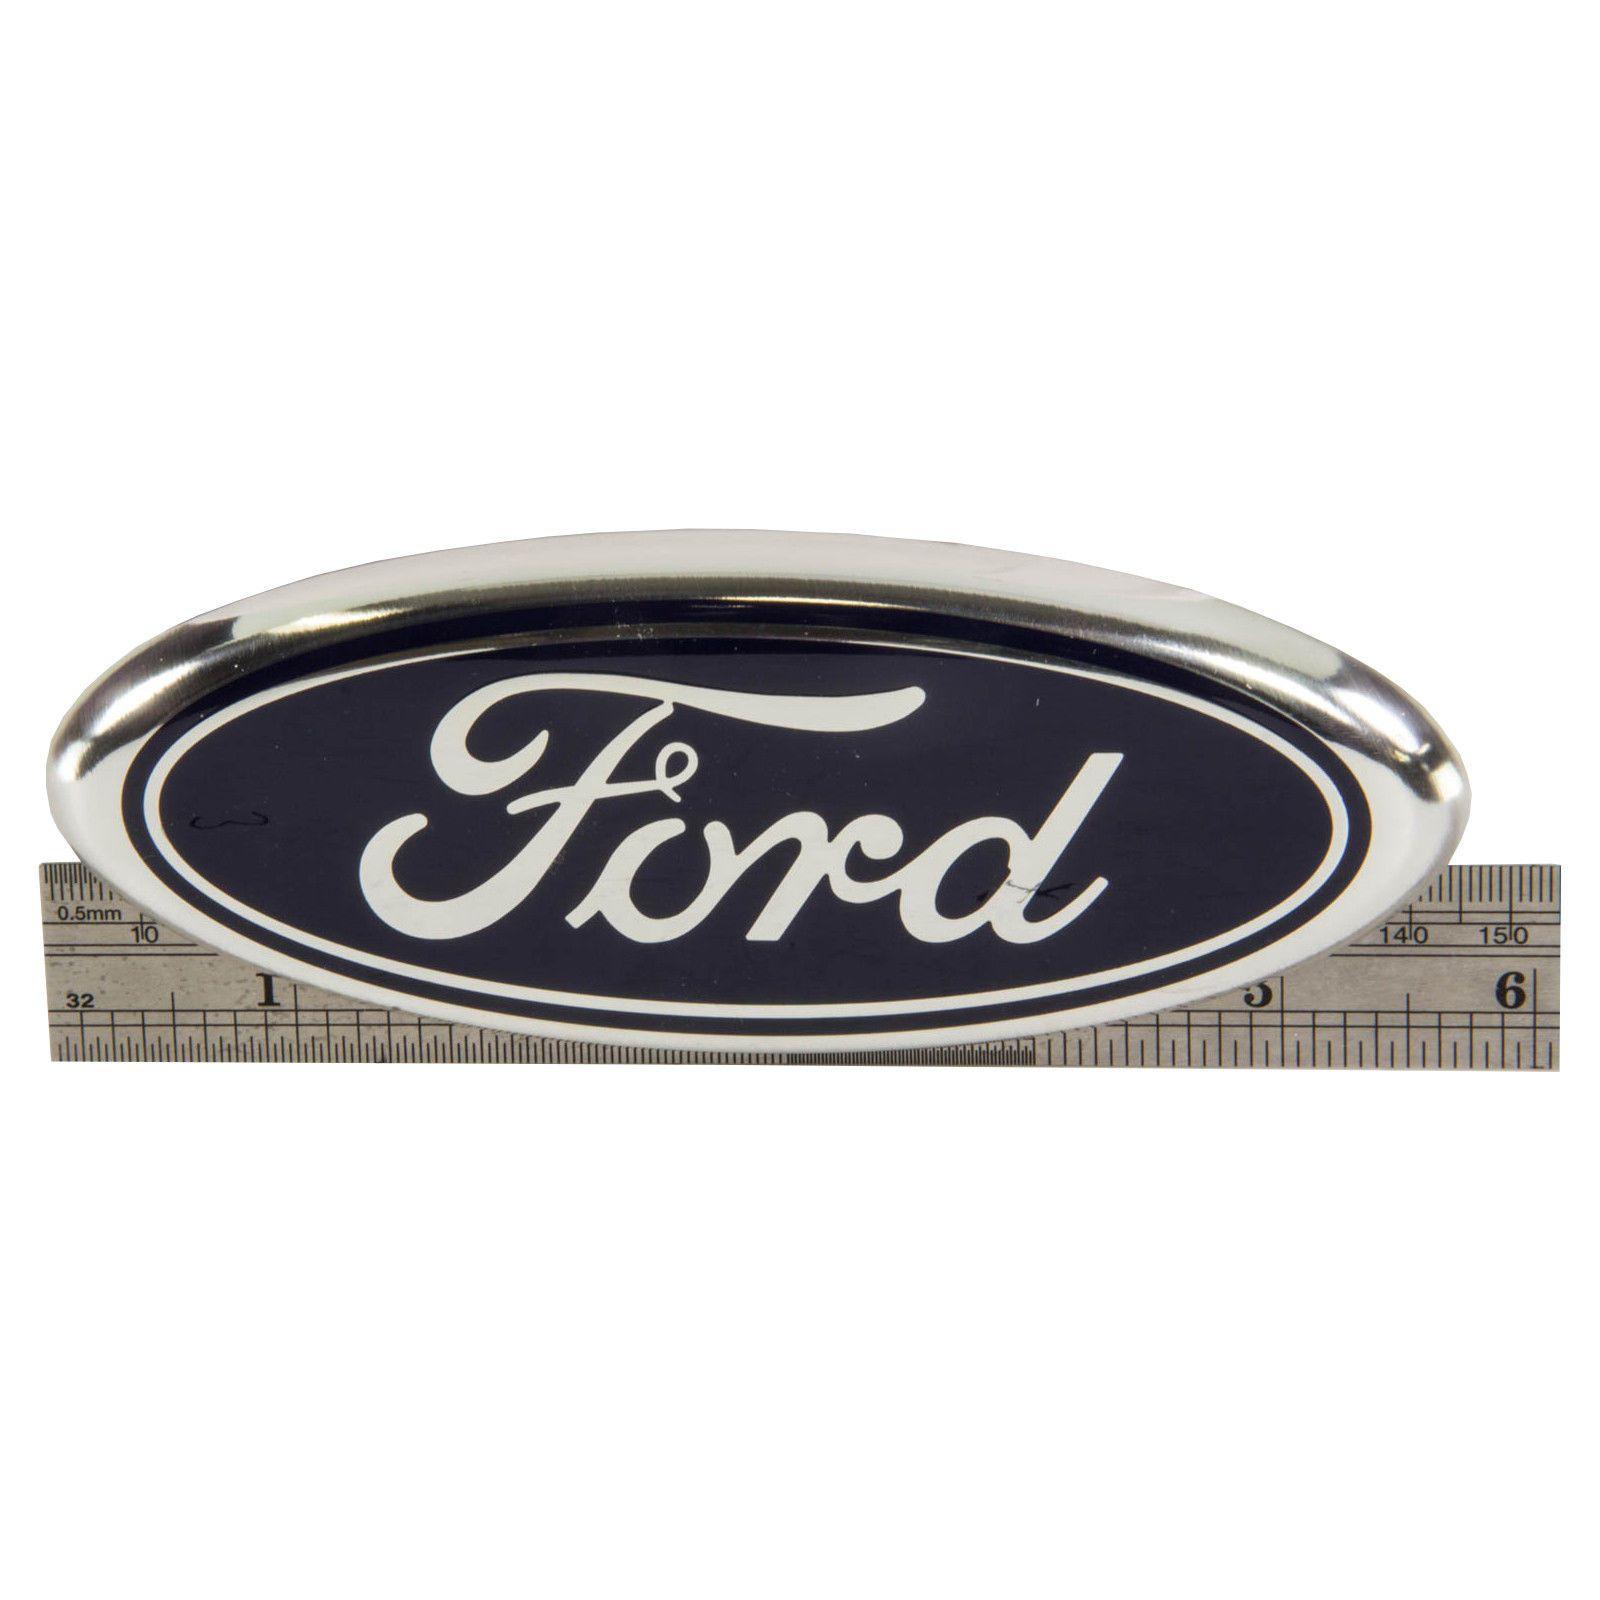 2014 Ford Logo - Awesome OEM NEW 2012-2014 Ford Focus Blue Ford Oval Emblem On Trunk ...